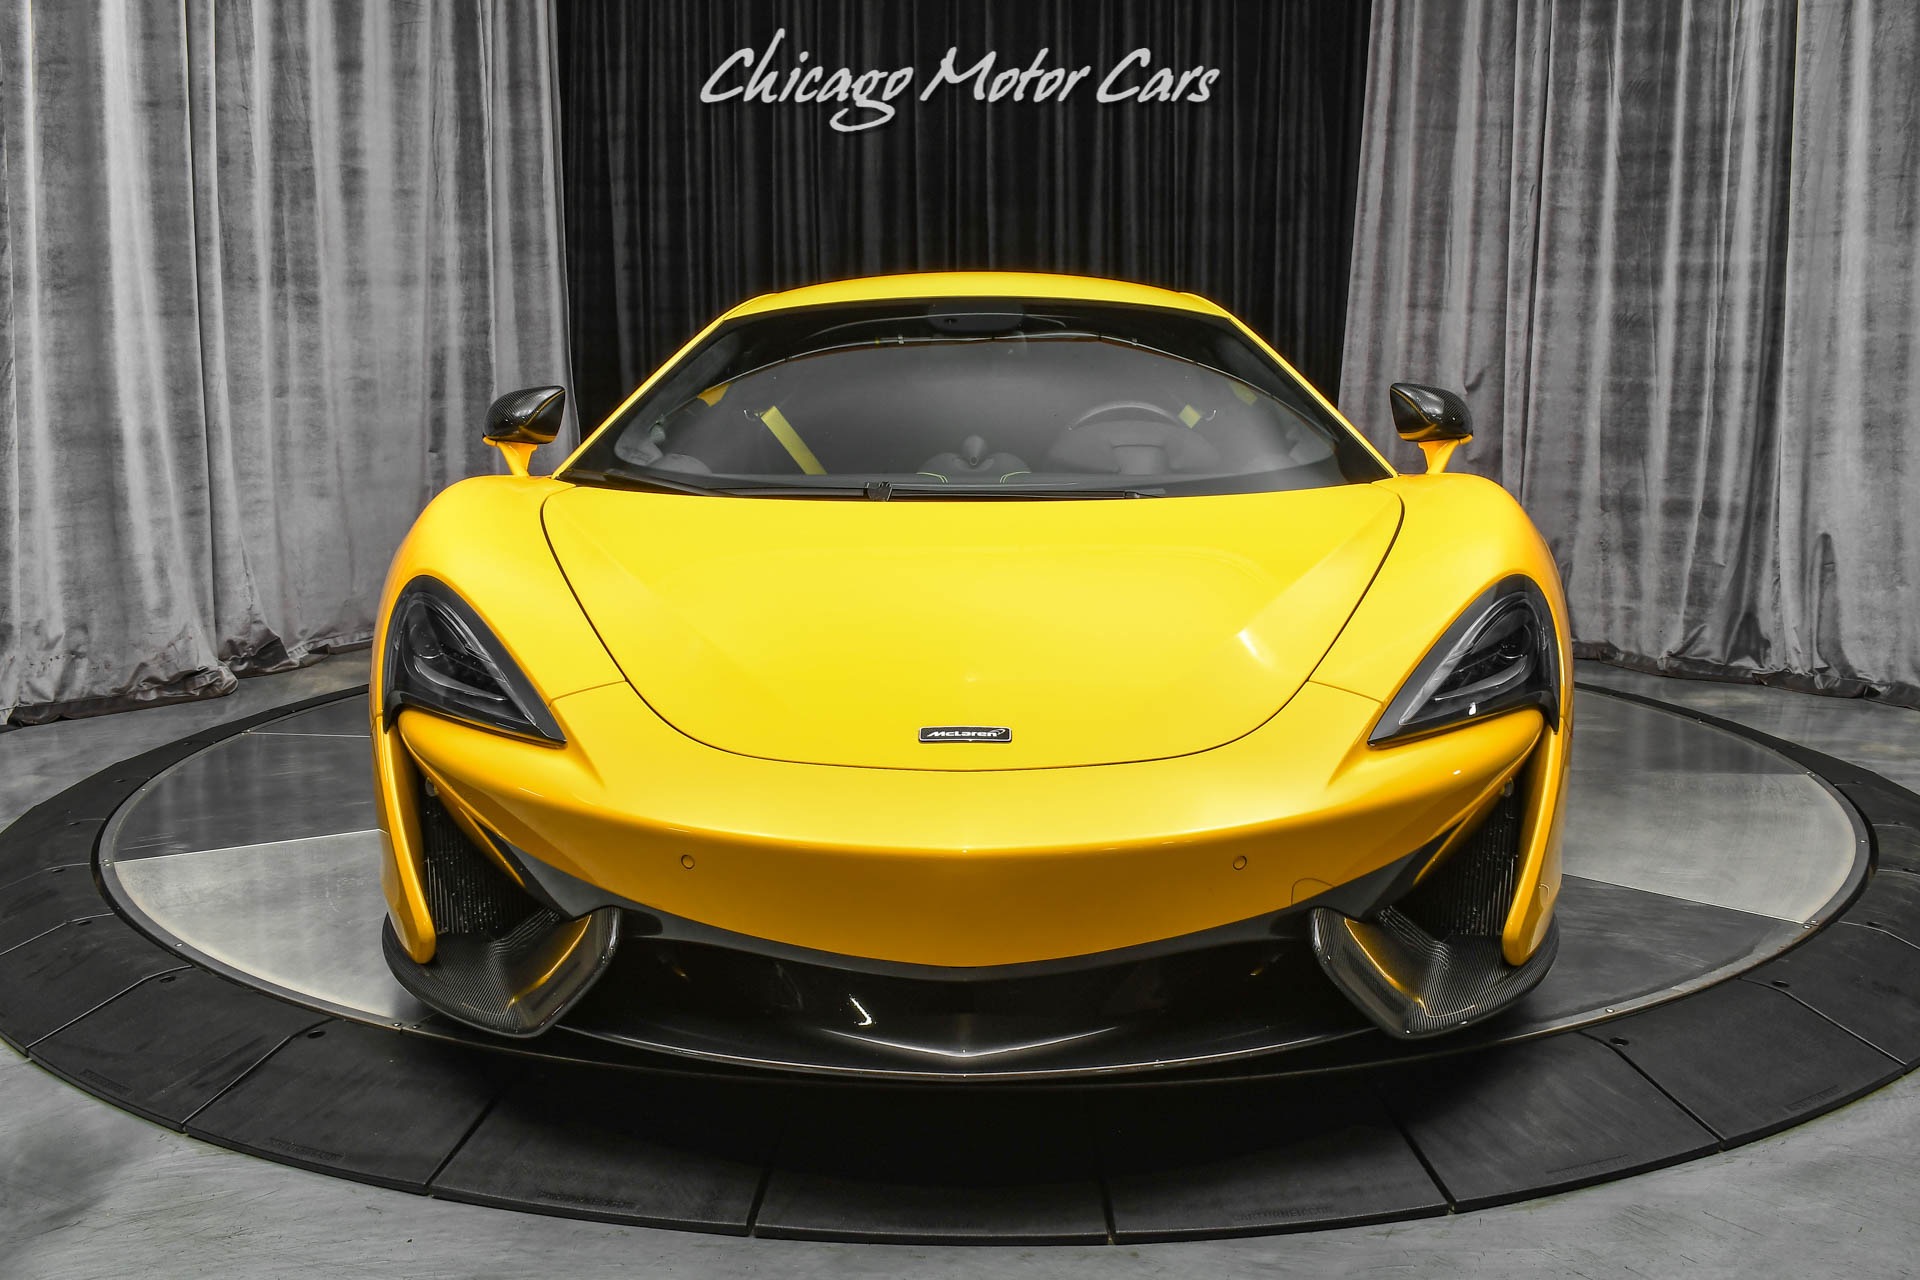 Used-2016-McLaren-570S-Coupe-Carbon-Fiber-Packs-1---2-Volcano-Yellow-ONLY-7k-Miles